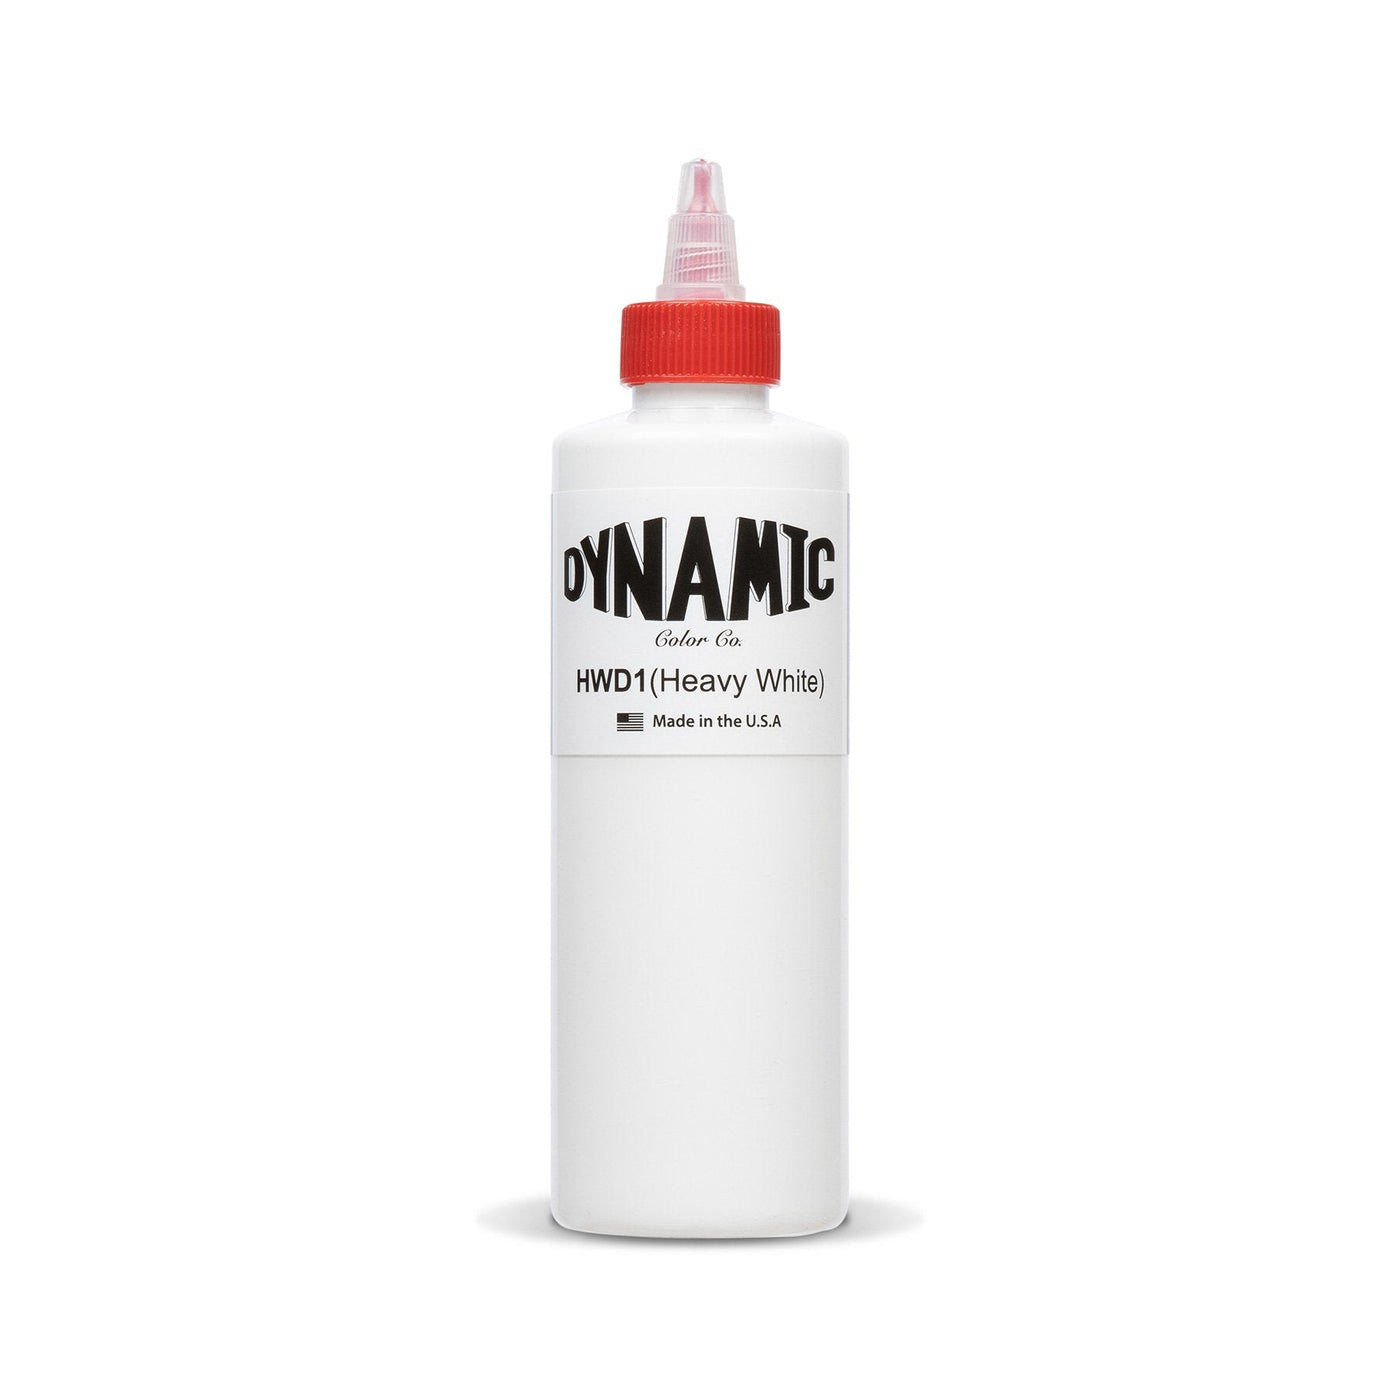 Dynamic Non Mixing Heavy White Tattoo Ink - Tattoo Ink - Mithra Tattoo Supplies Canada